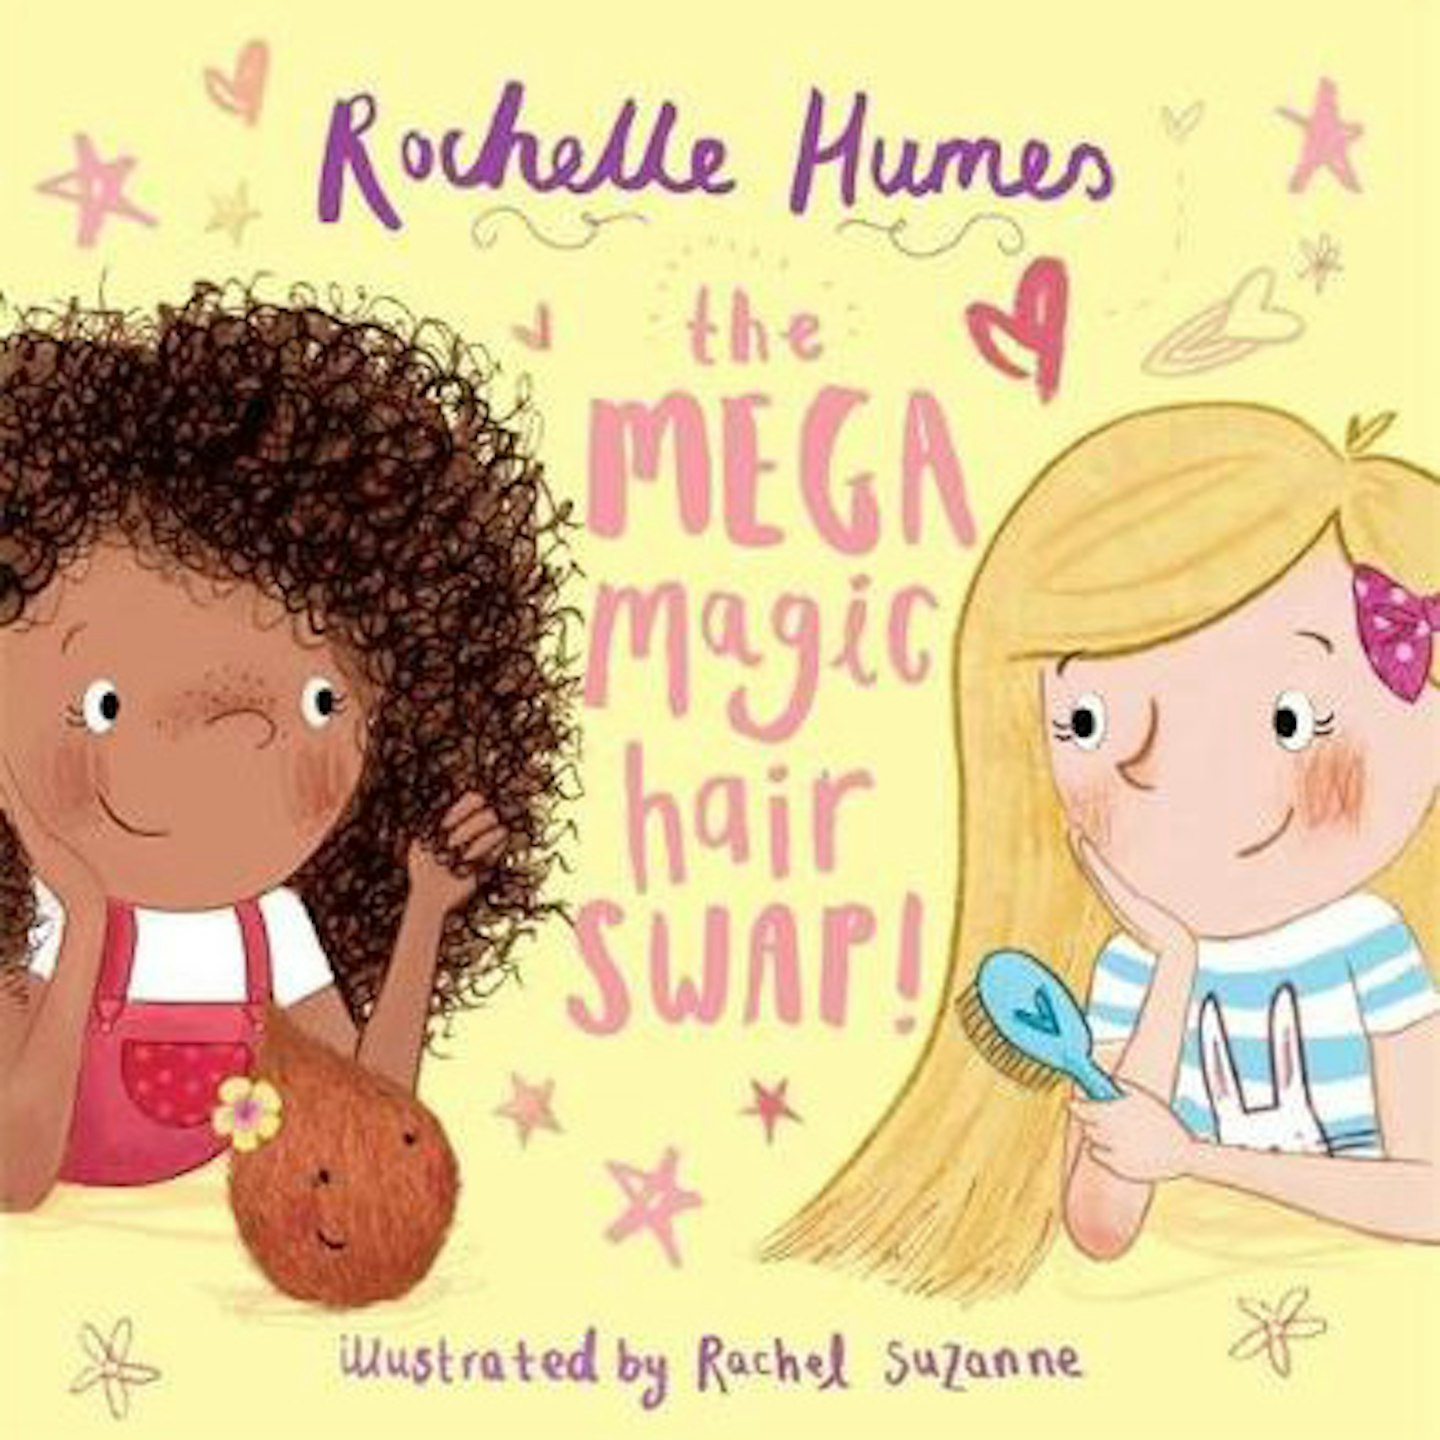 The Mega Magic Hair Swap! by Rochelle Humes